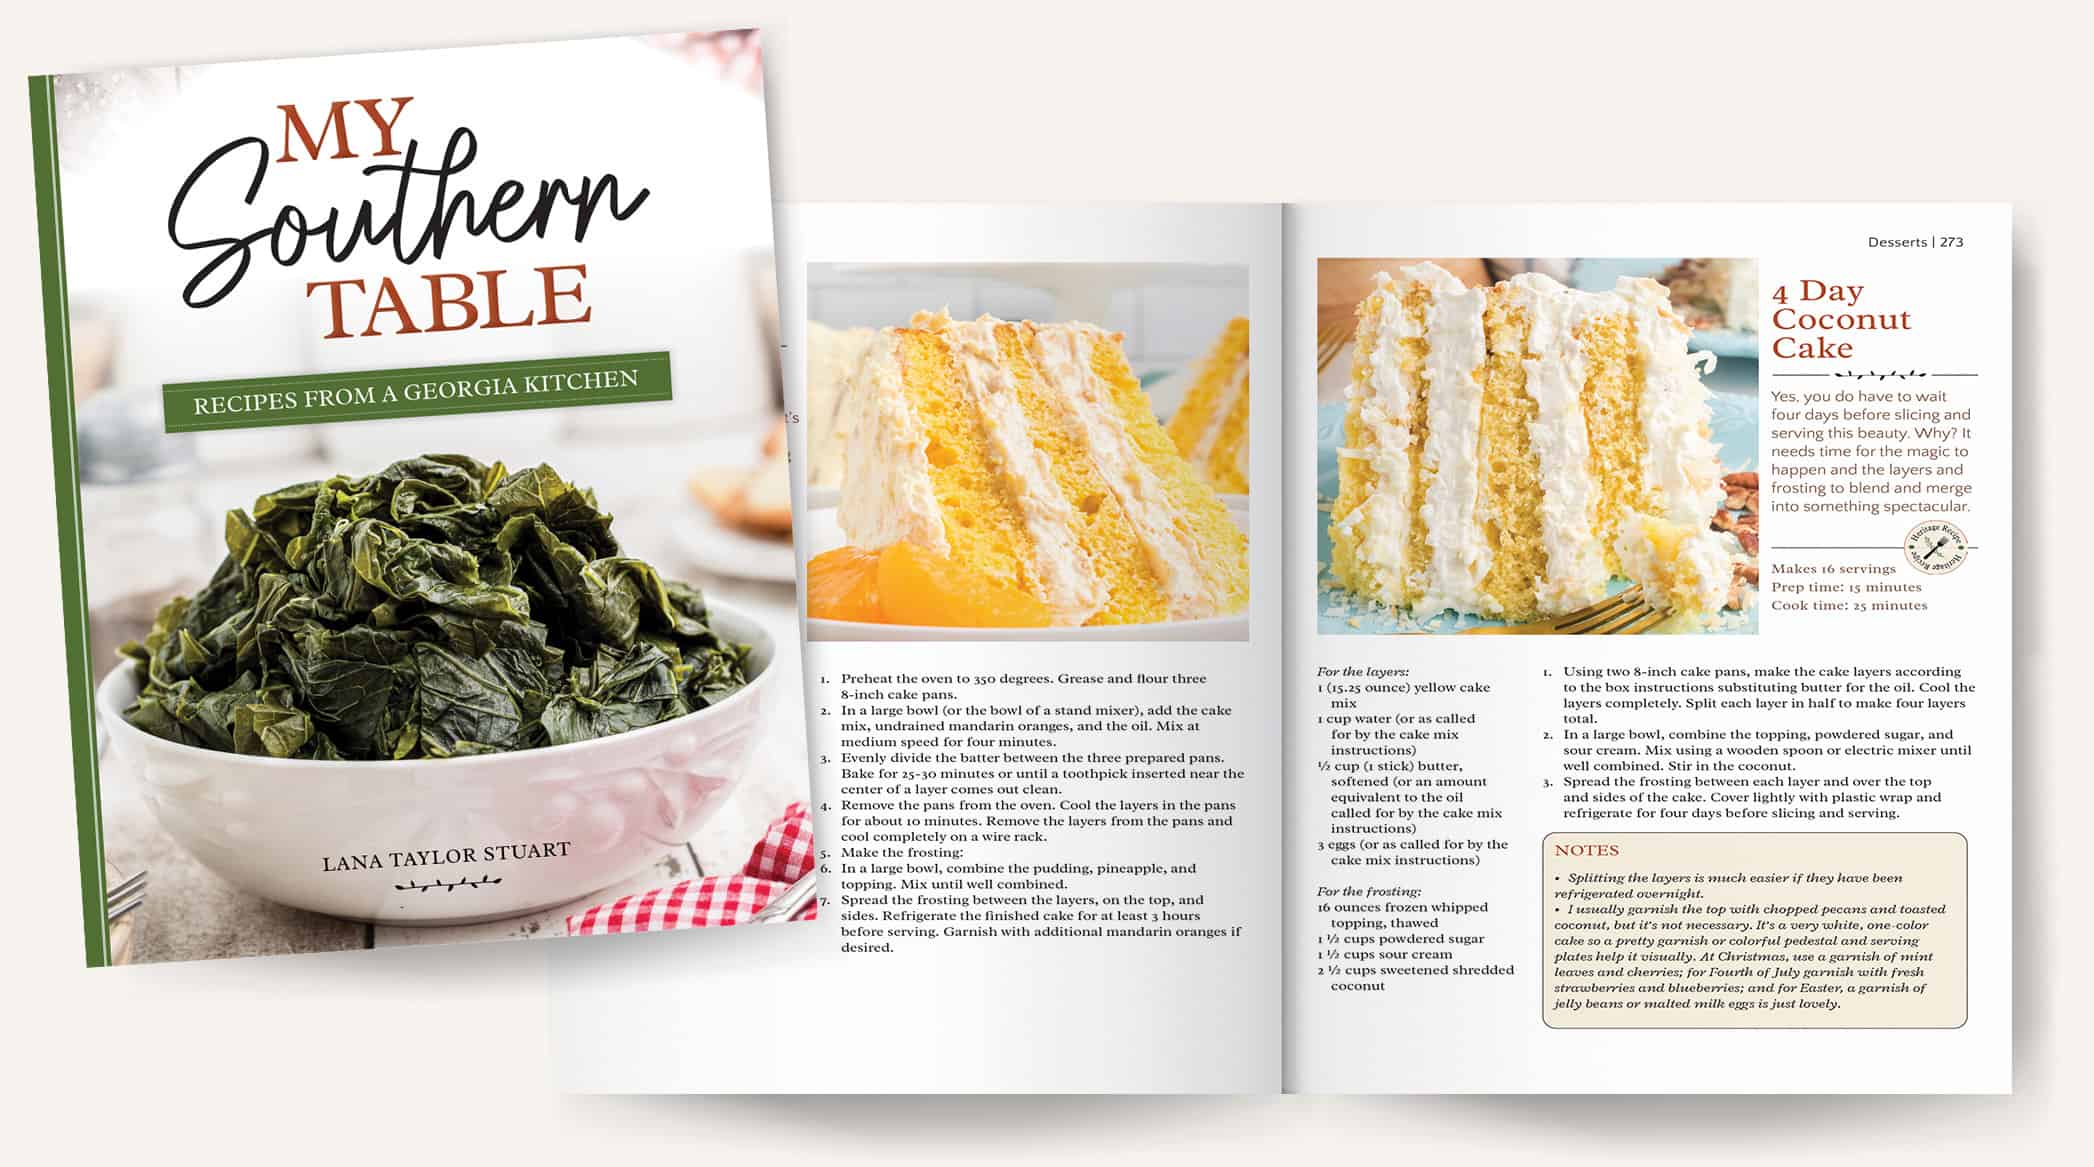 Mockup of My Southern Table cookbook pages 272-273.